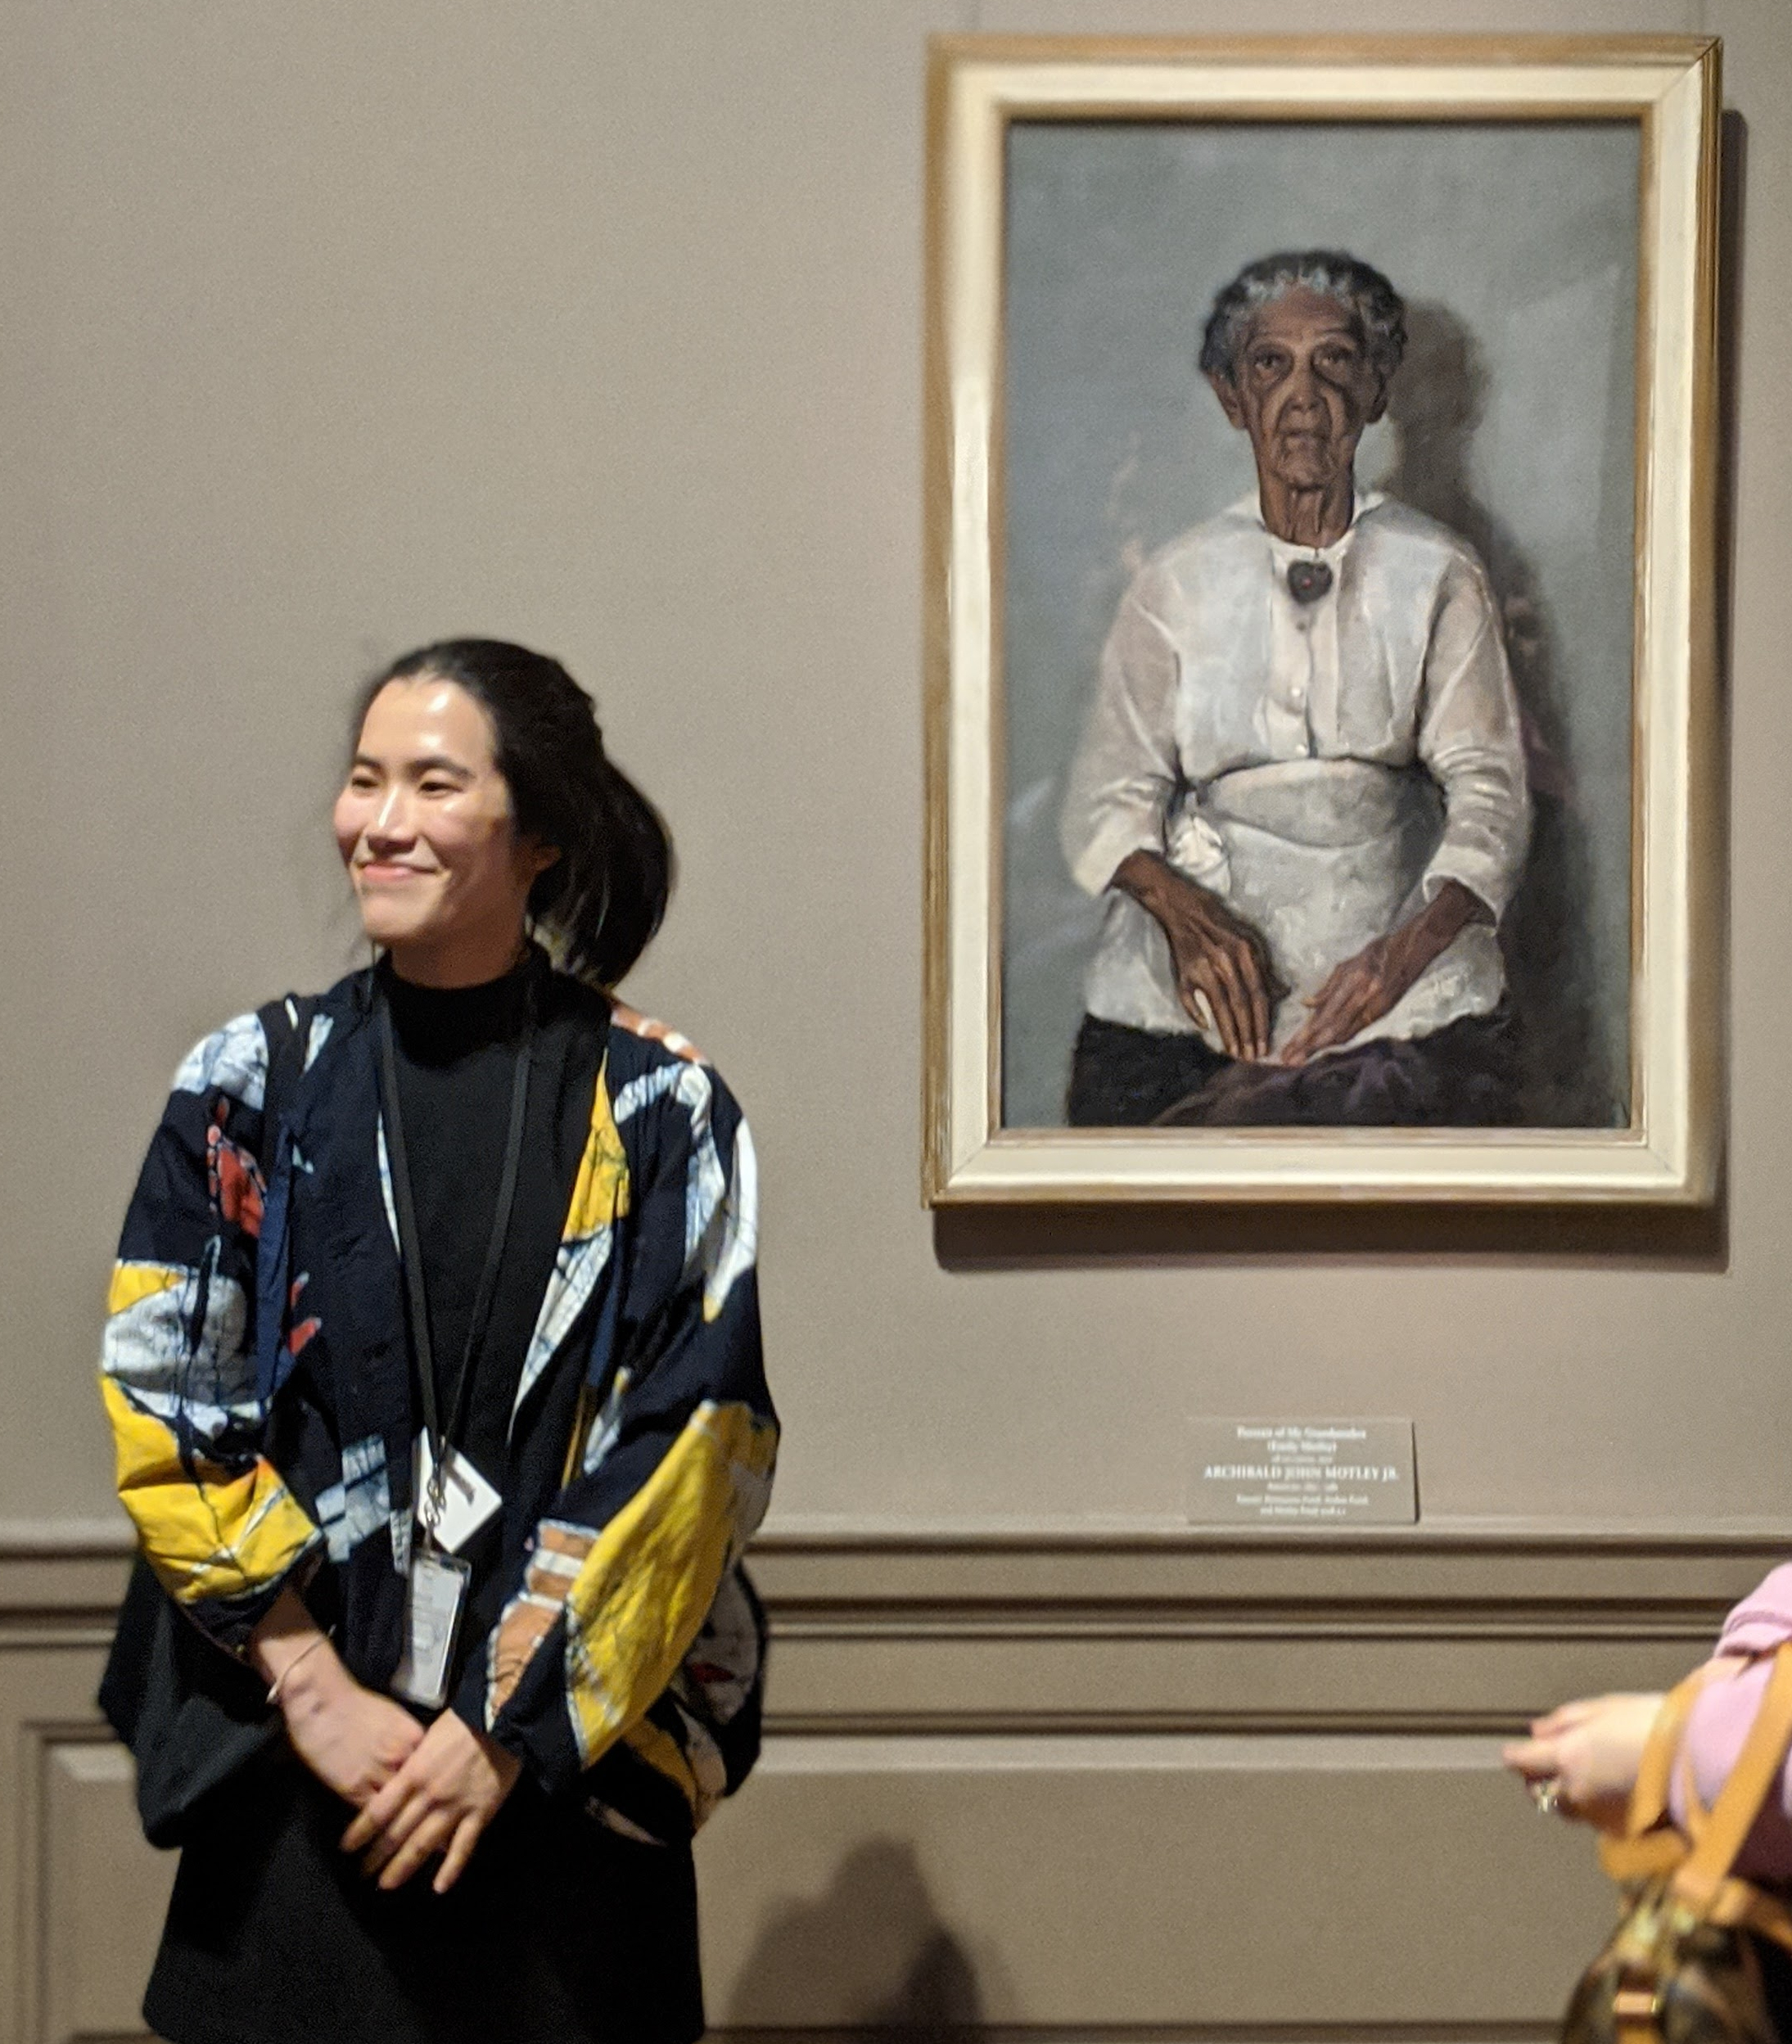 Annie leading a tour at the National Gallery of Art. She is standing in front of a portrait of Emily Motley, painted by John Motley.